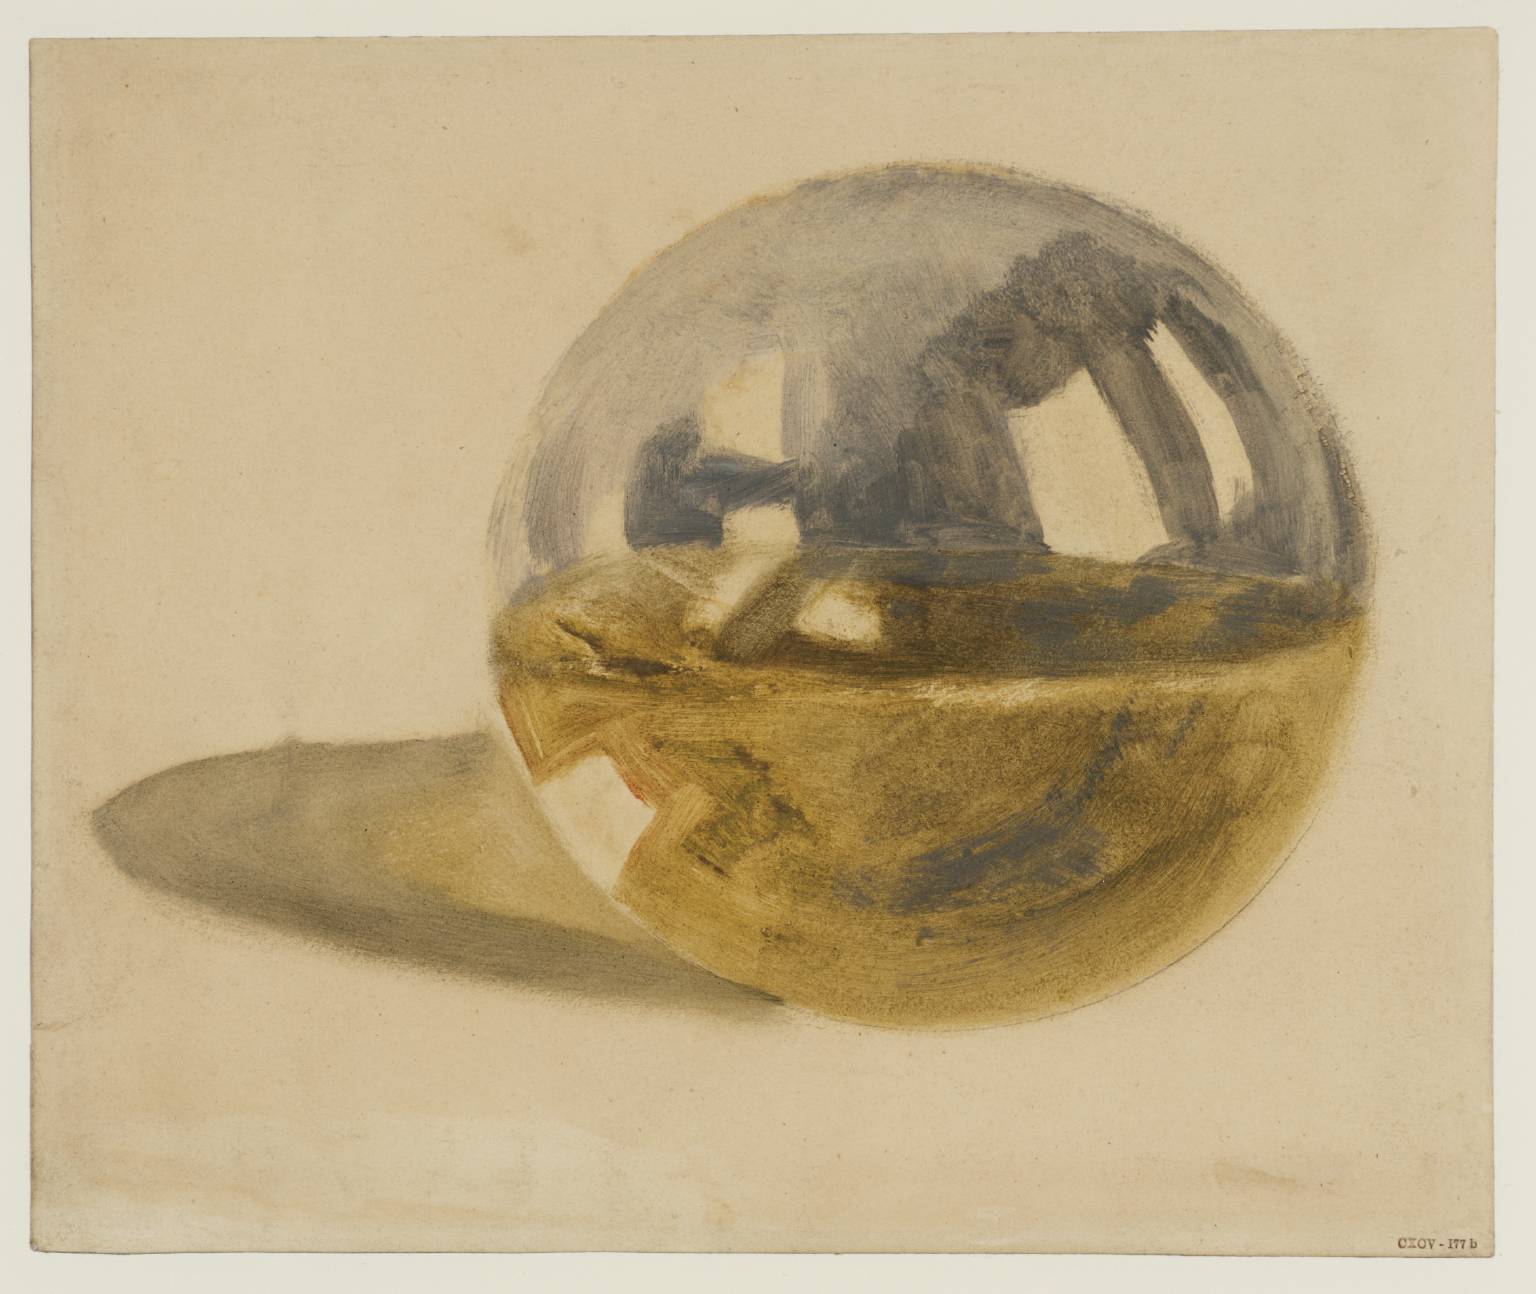 Joseph Mallord William Turner, (title not known), ca. 1810, oil on paper, 20 × 262 mm. Photo © Tate